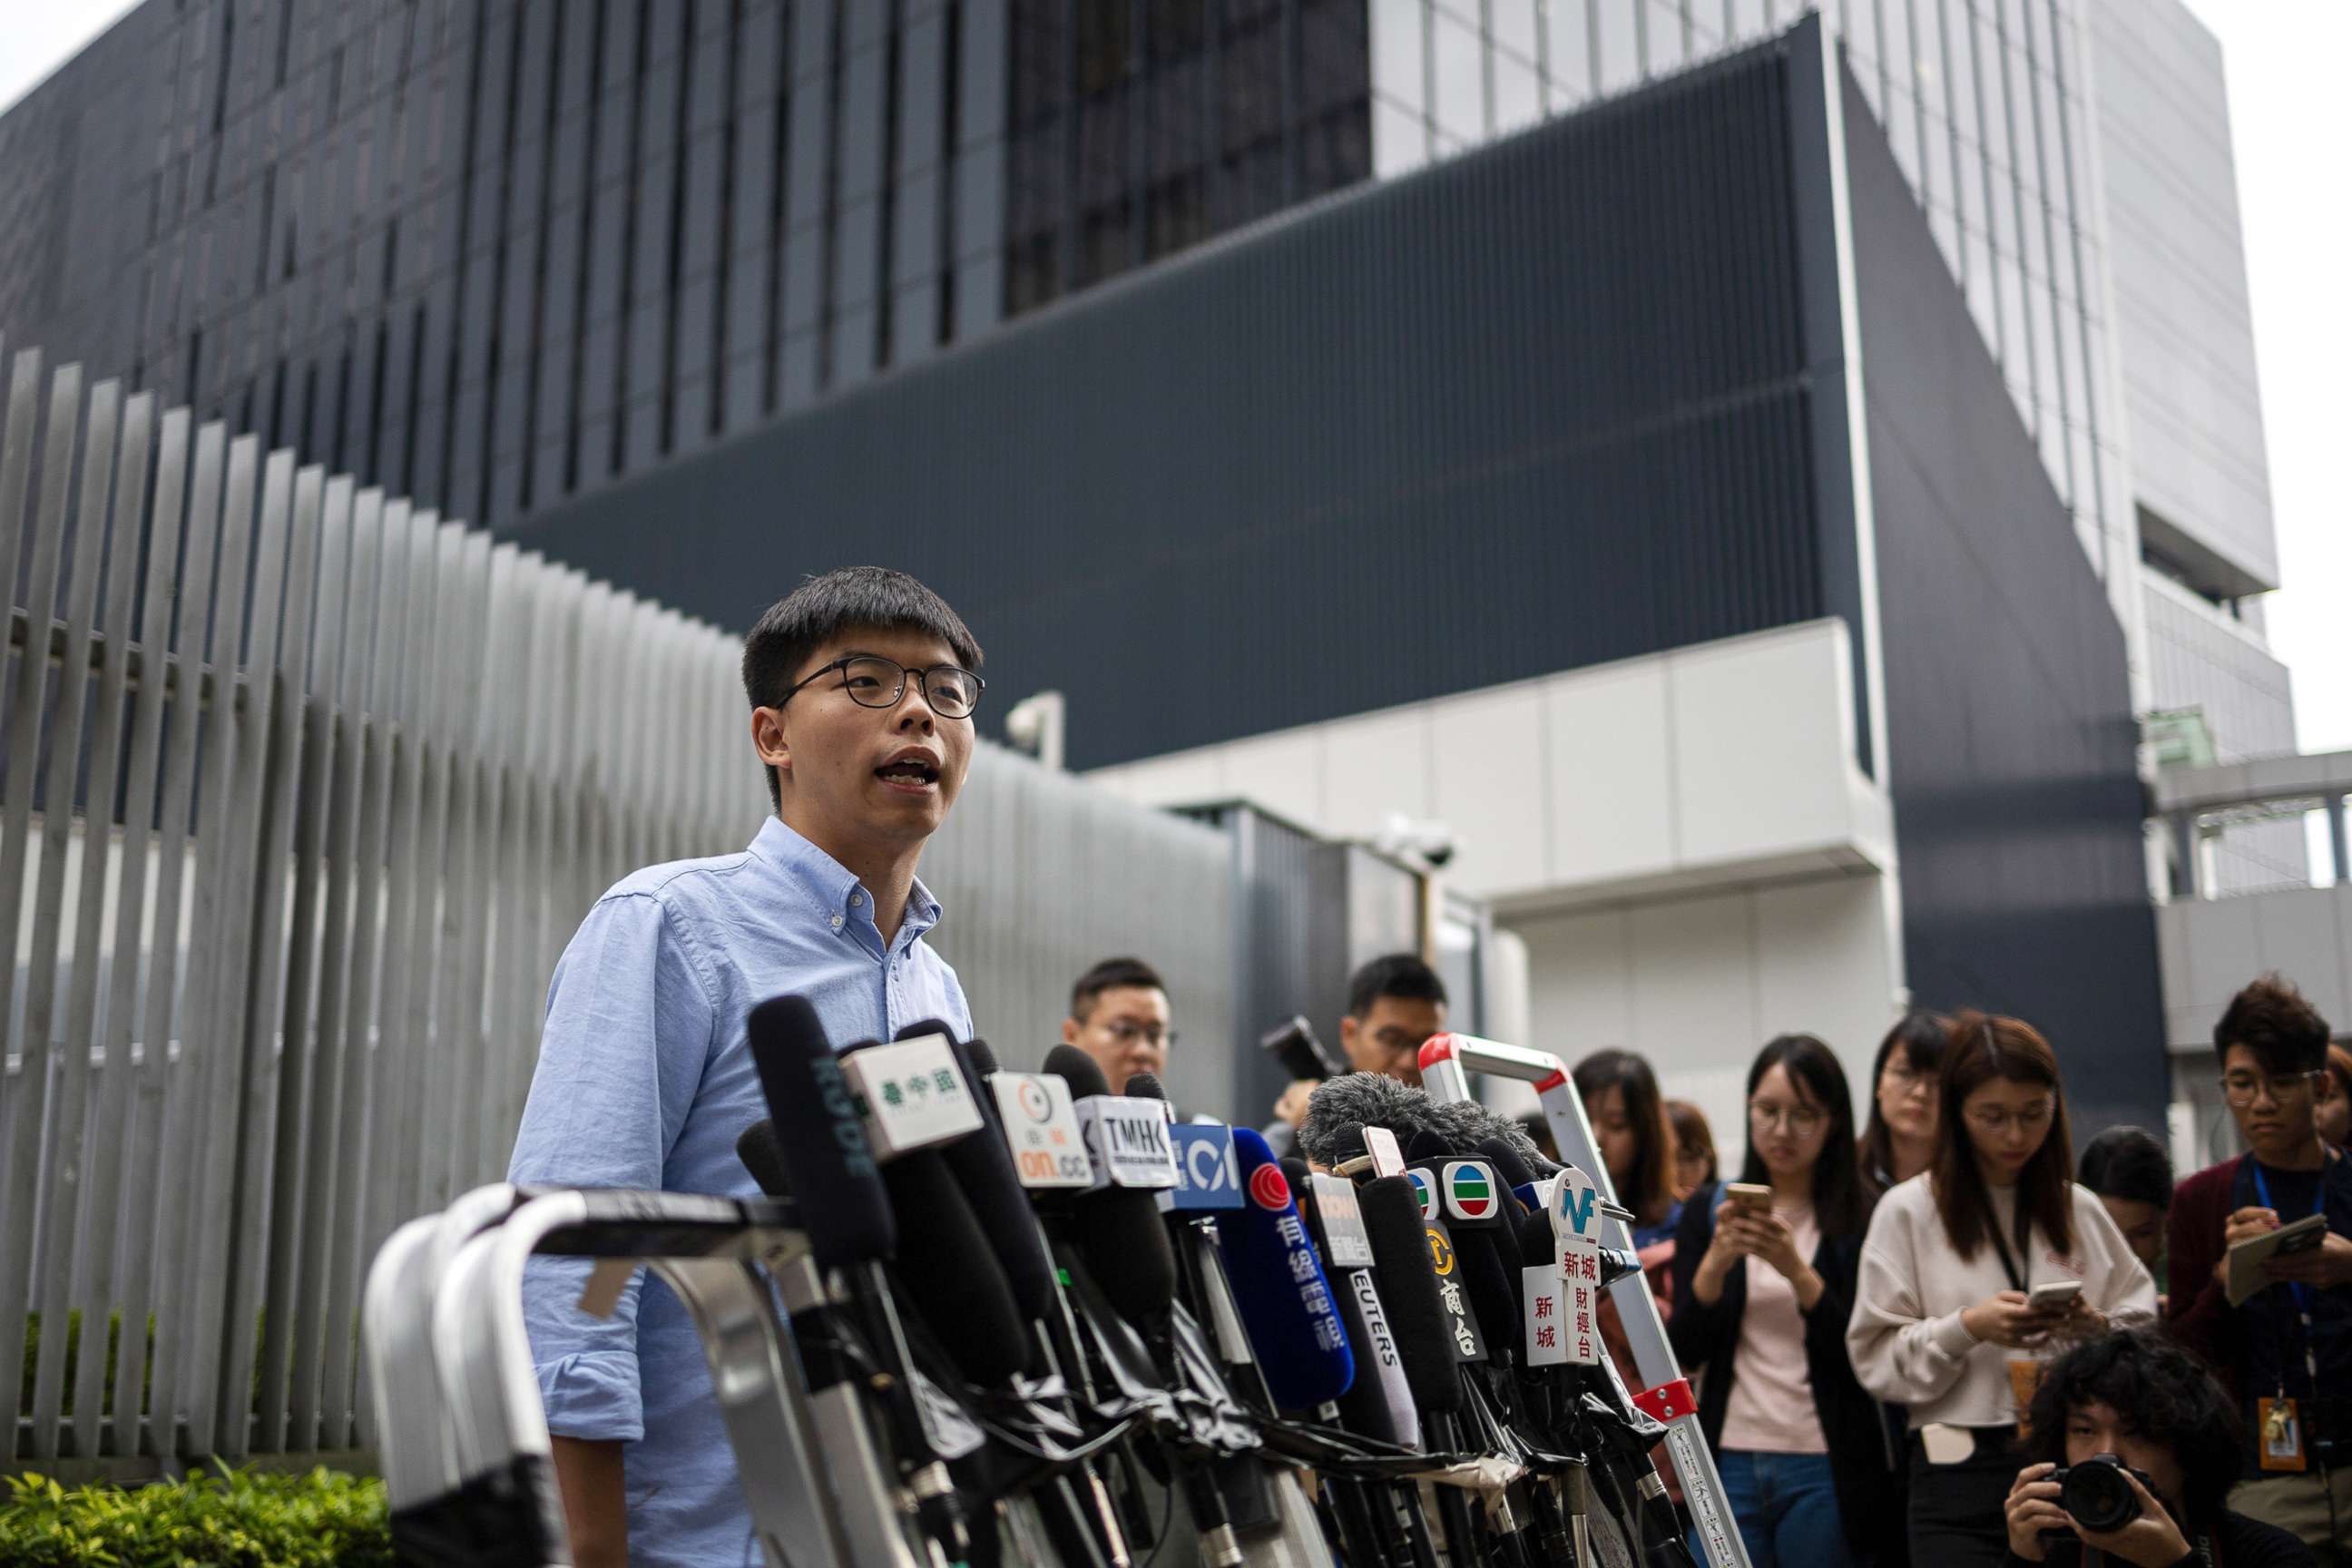 PHOTO: Pro-democracy activist and leader of Hong Kong's Demosisto party, Joshua Wong, left, speaks at a press conference outside the Legislative Council in Hong Kong, Oct. 29, 2019, after he was barred from running in the District Council Elections.